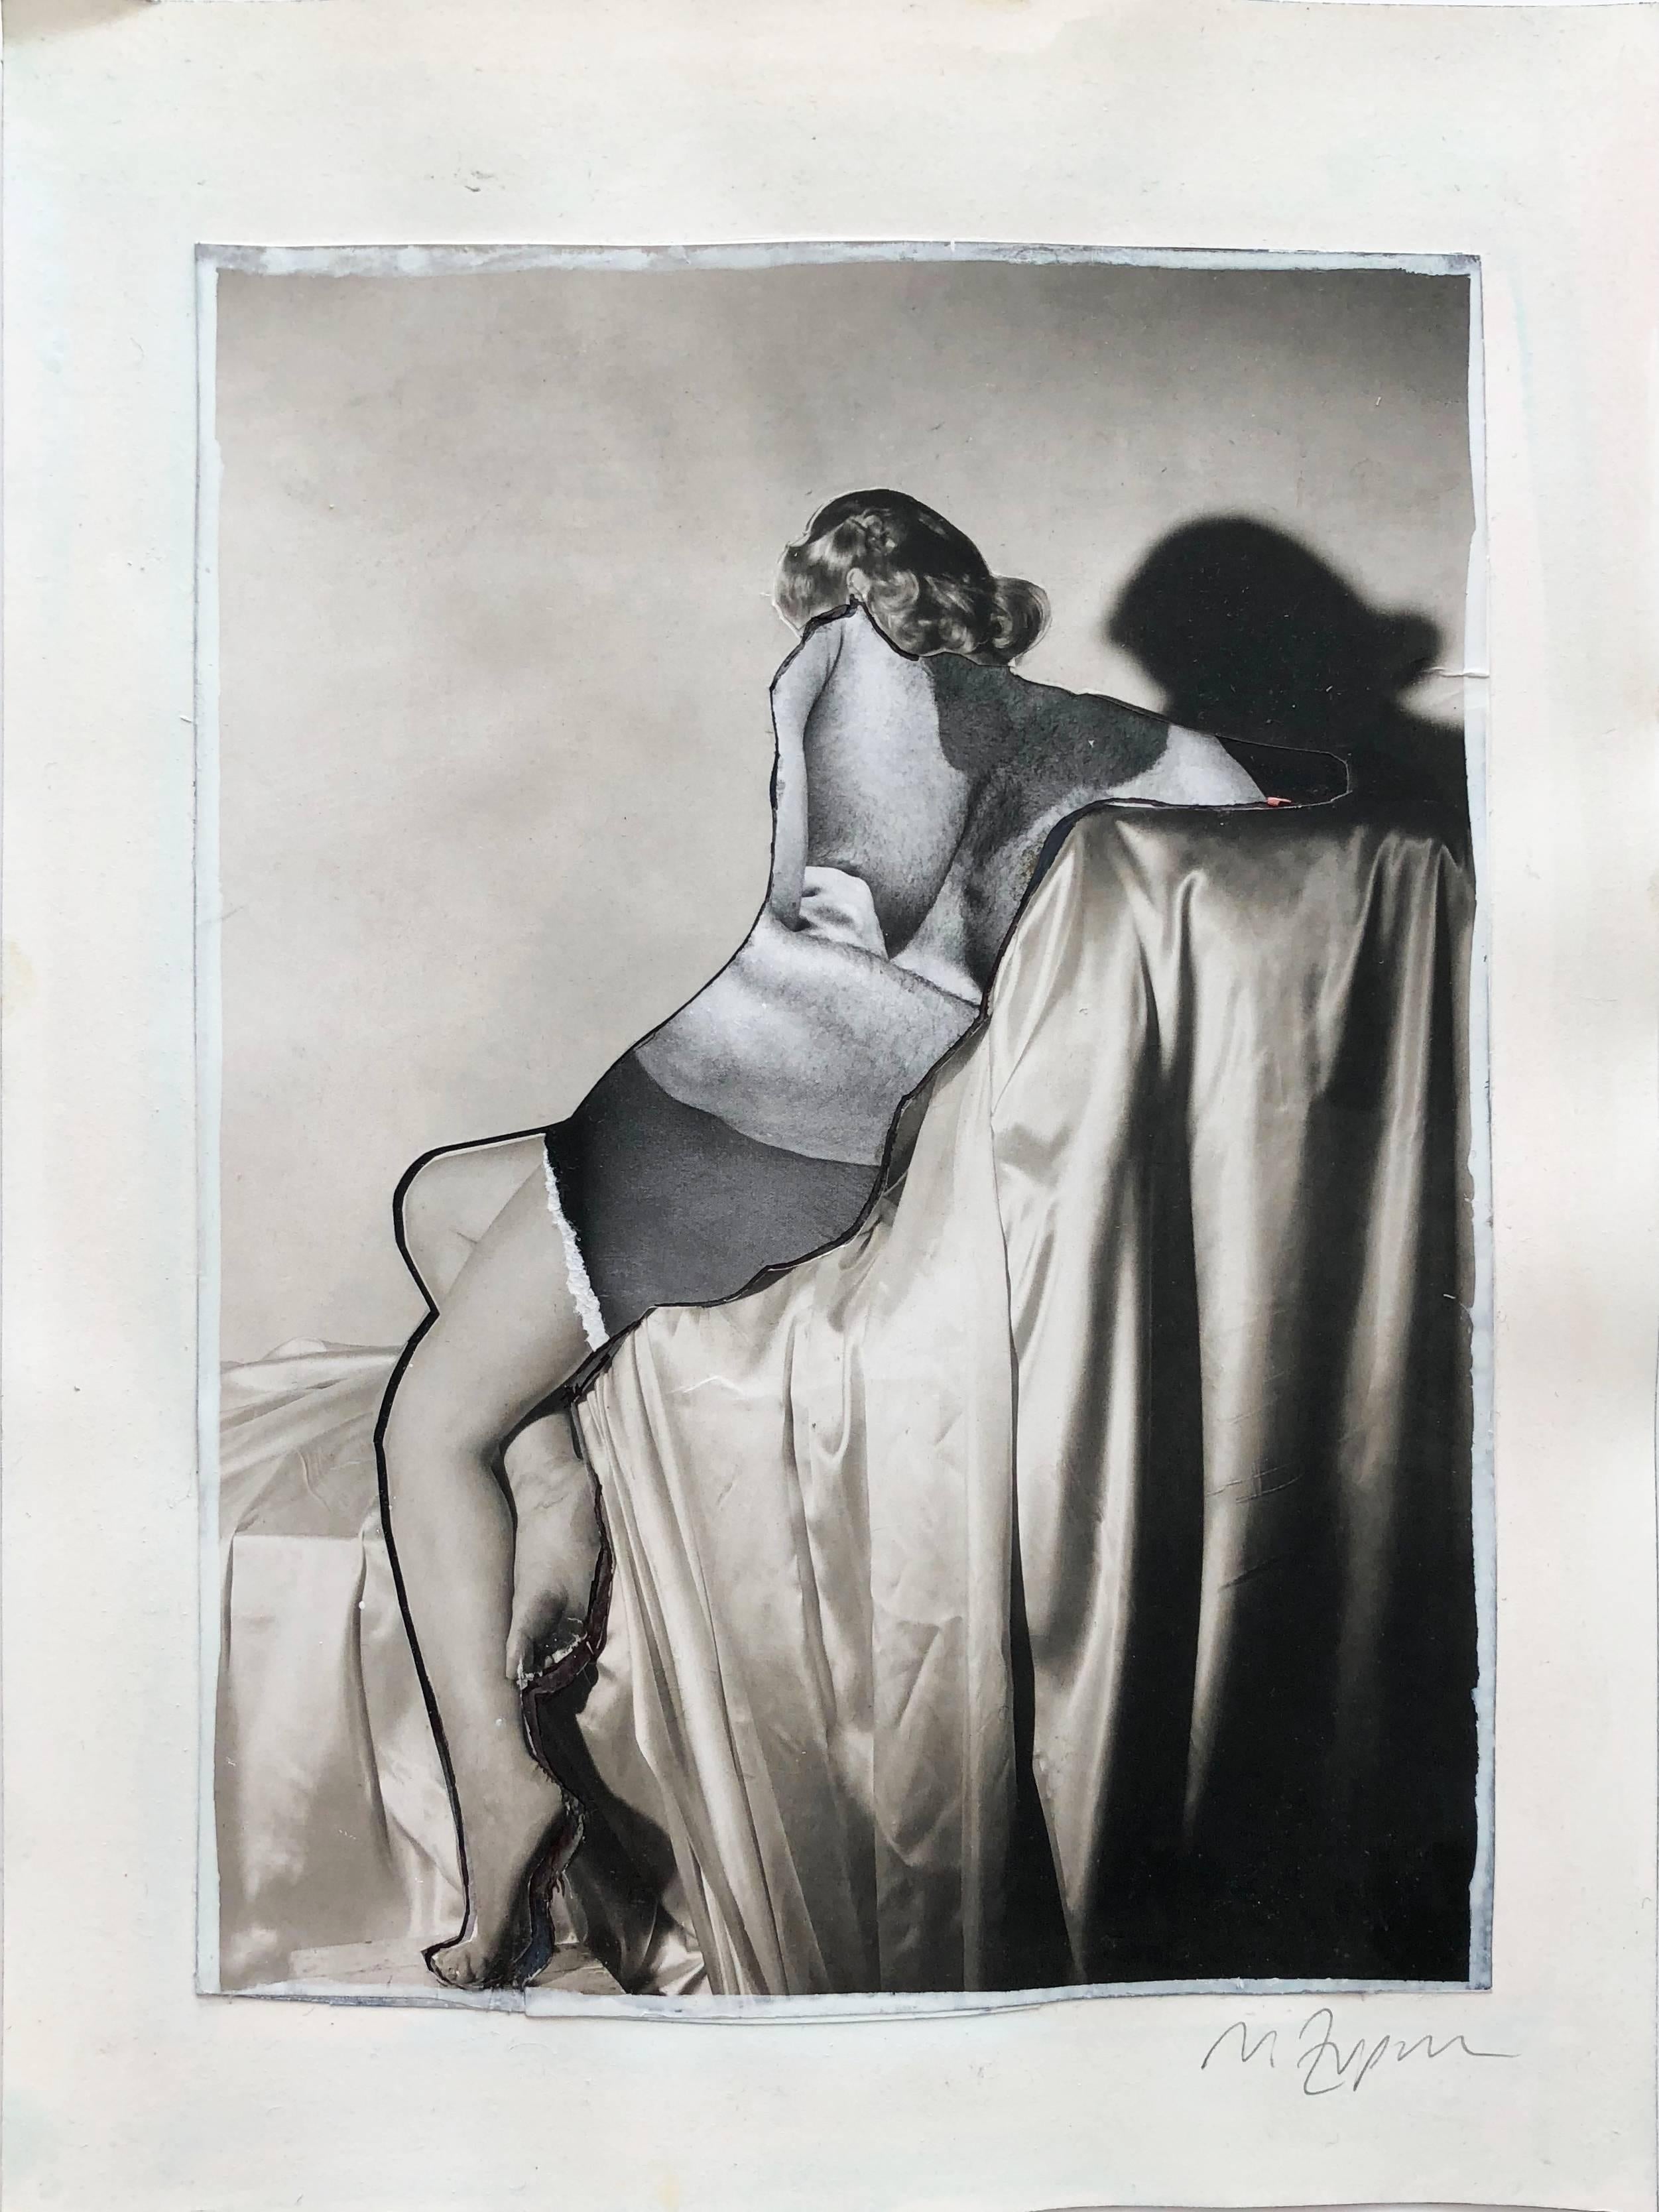 Natasha Zupan Black and White Photograph - Hermafrodite, #2261. Homage to Horst P. Horst collage color photograph